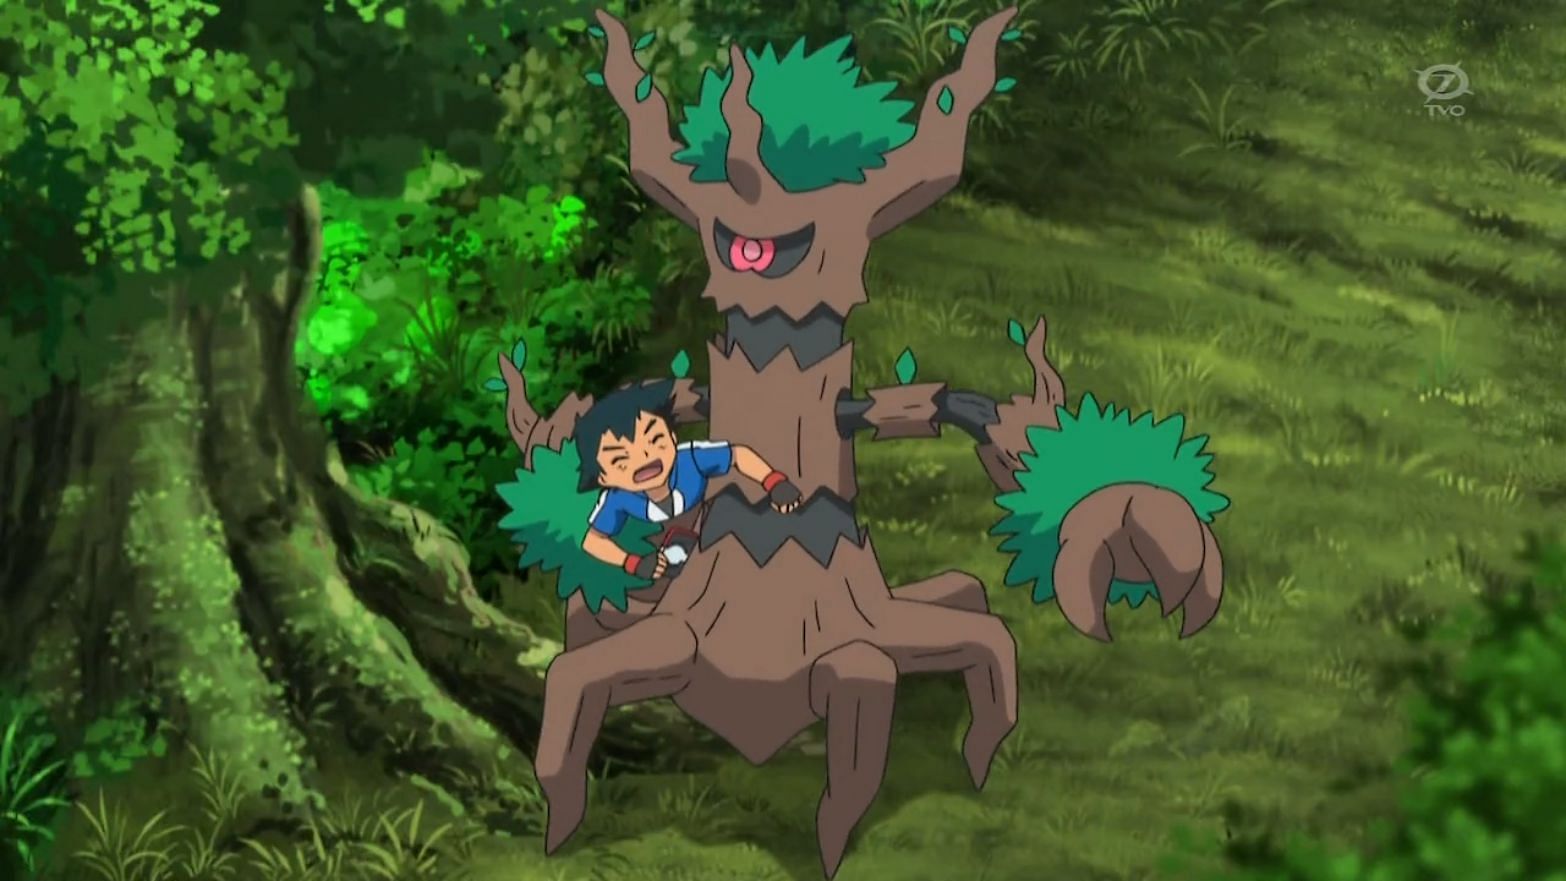 Trevenant was first introduced in Generation VI (Image via The Pokemon Company)